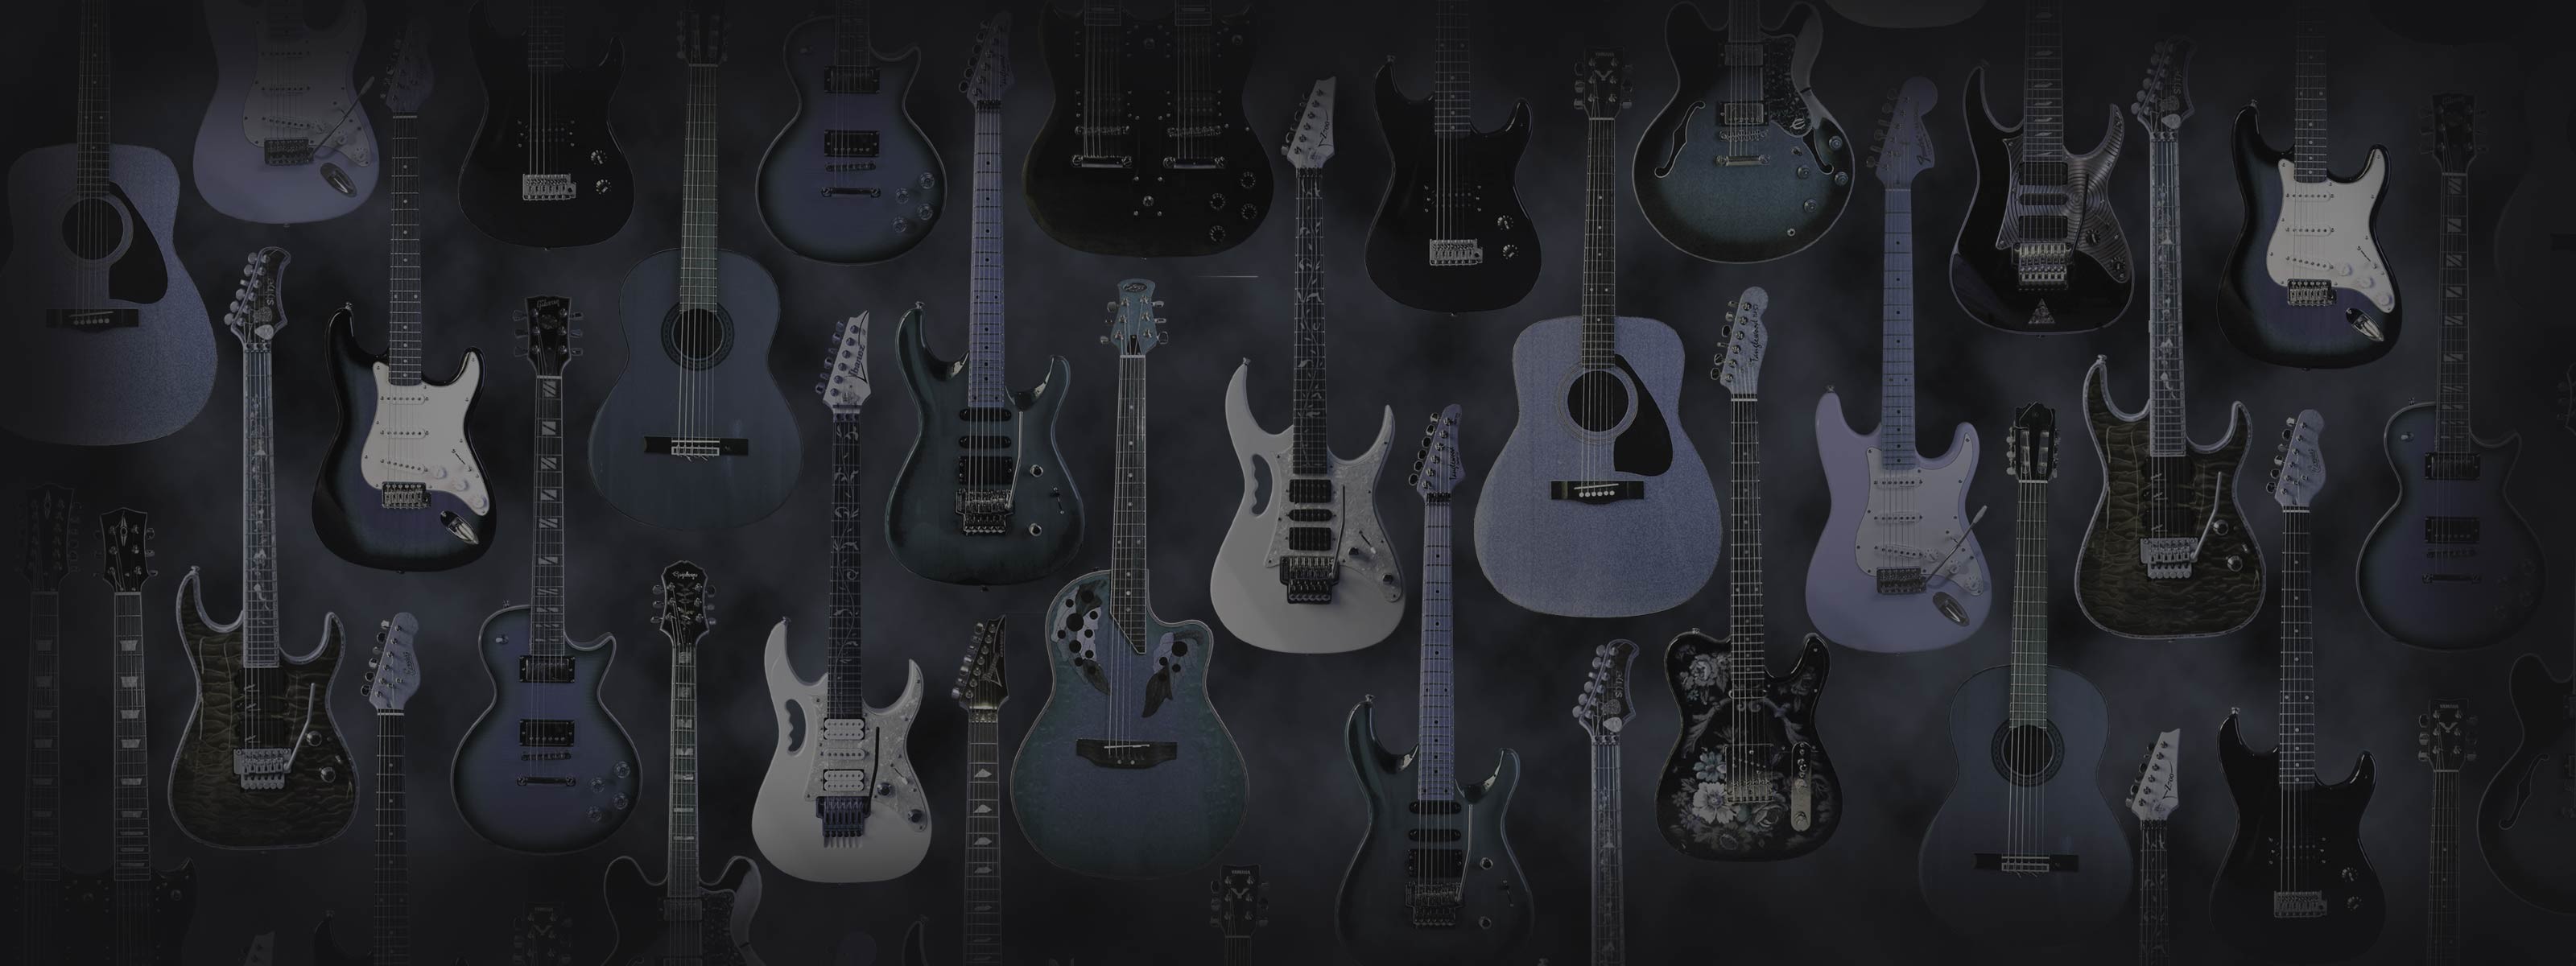 3200x1200 Dual monitor wallpaper, electric and acoustic guitars